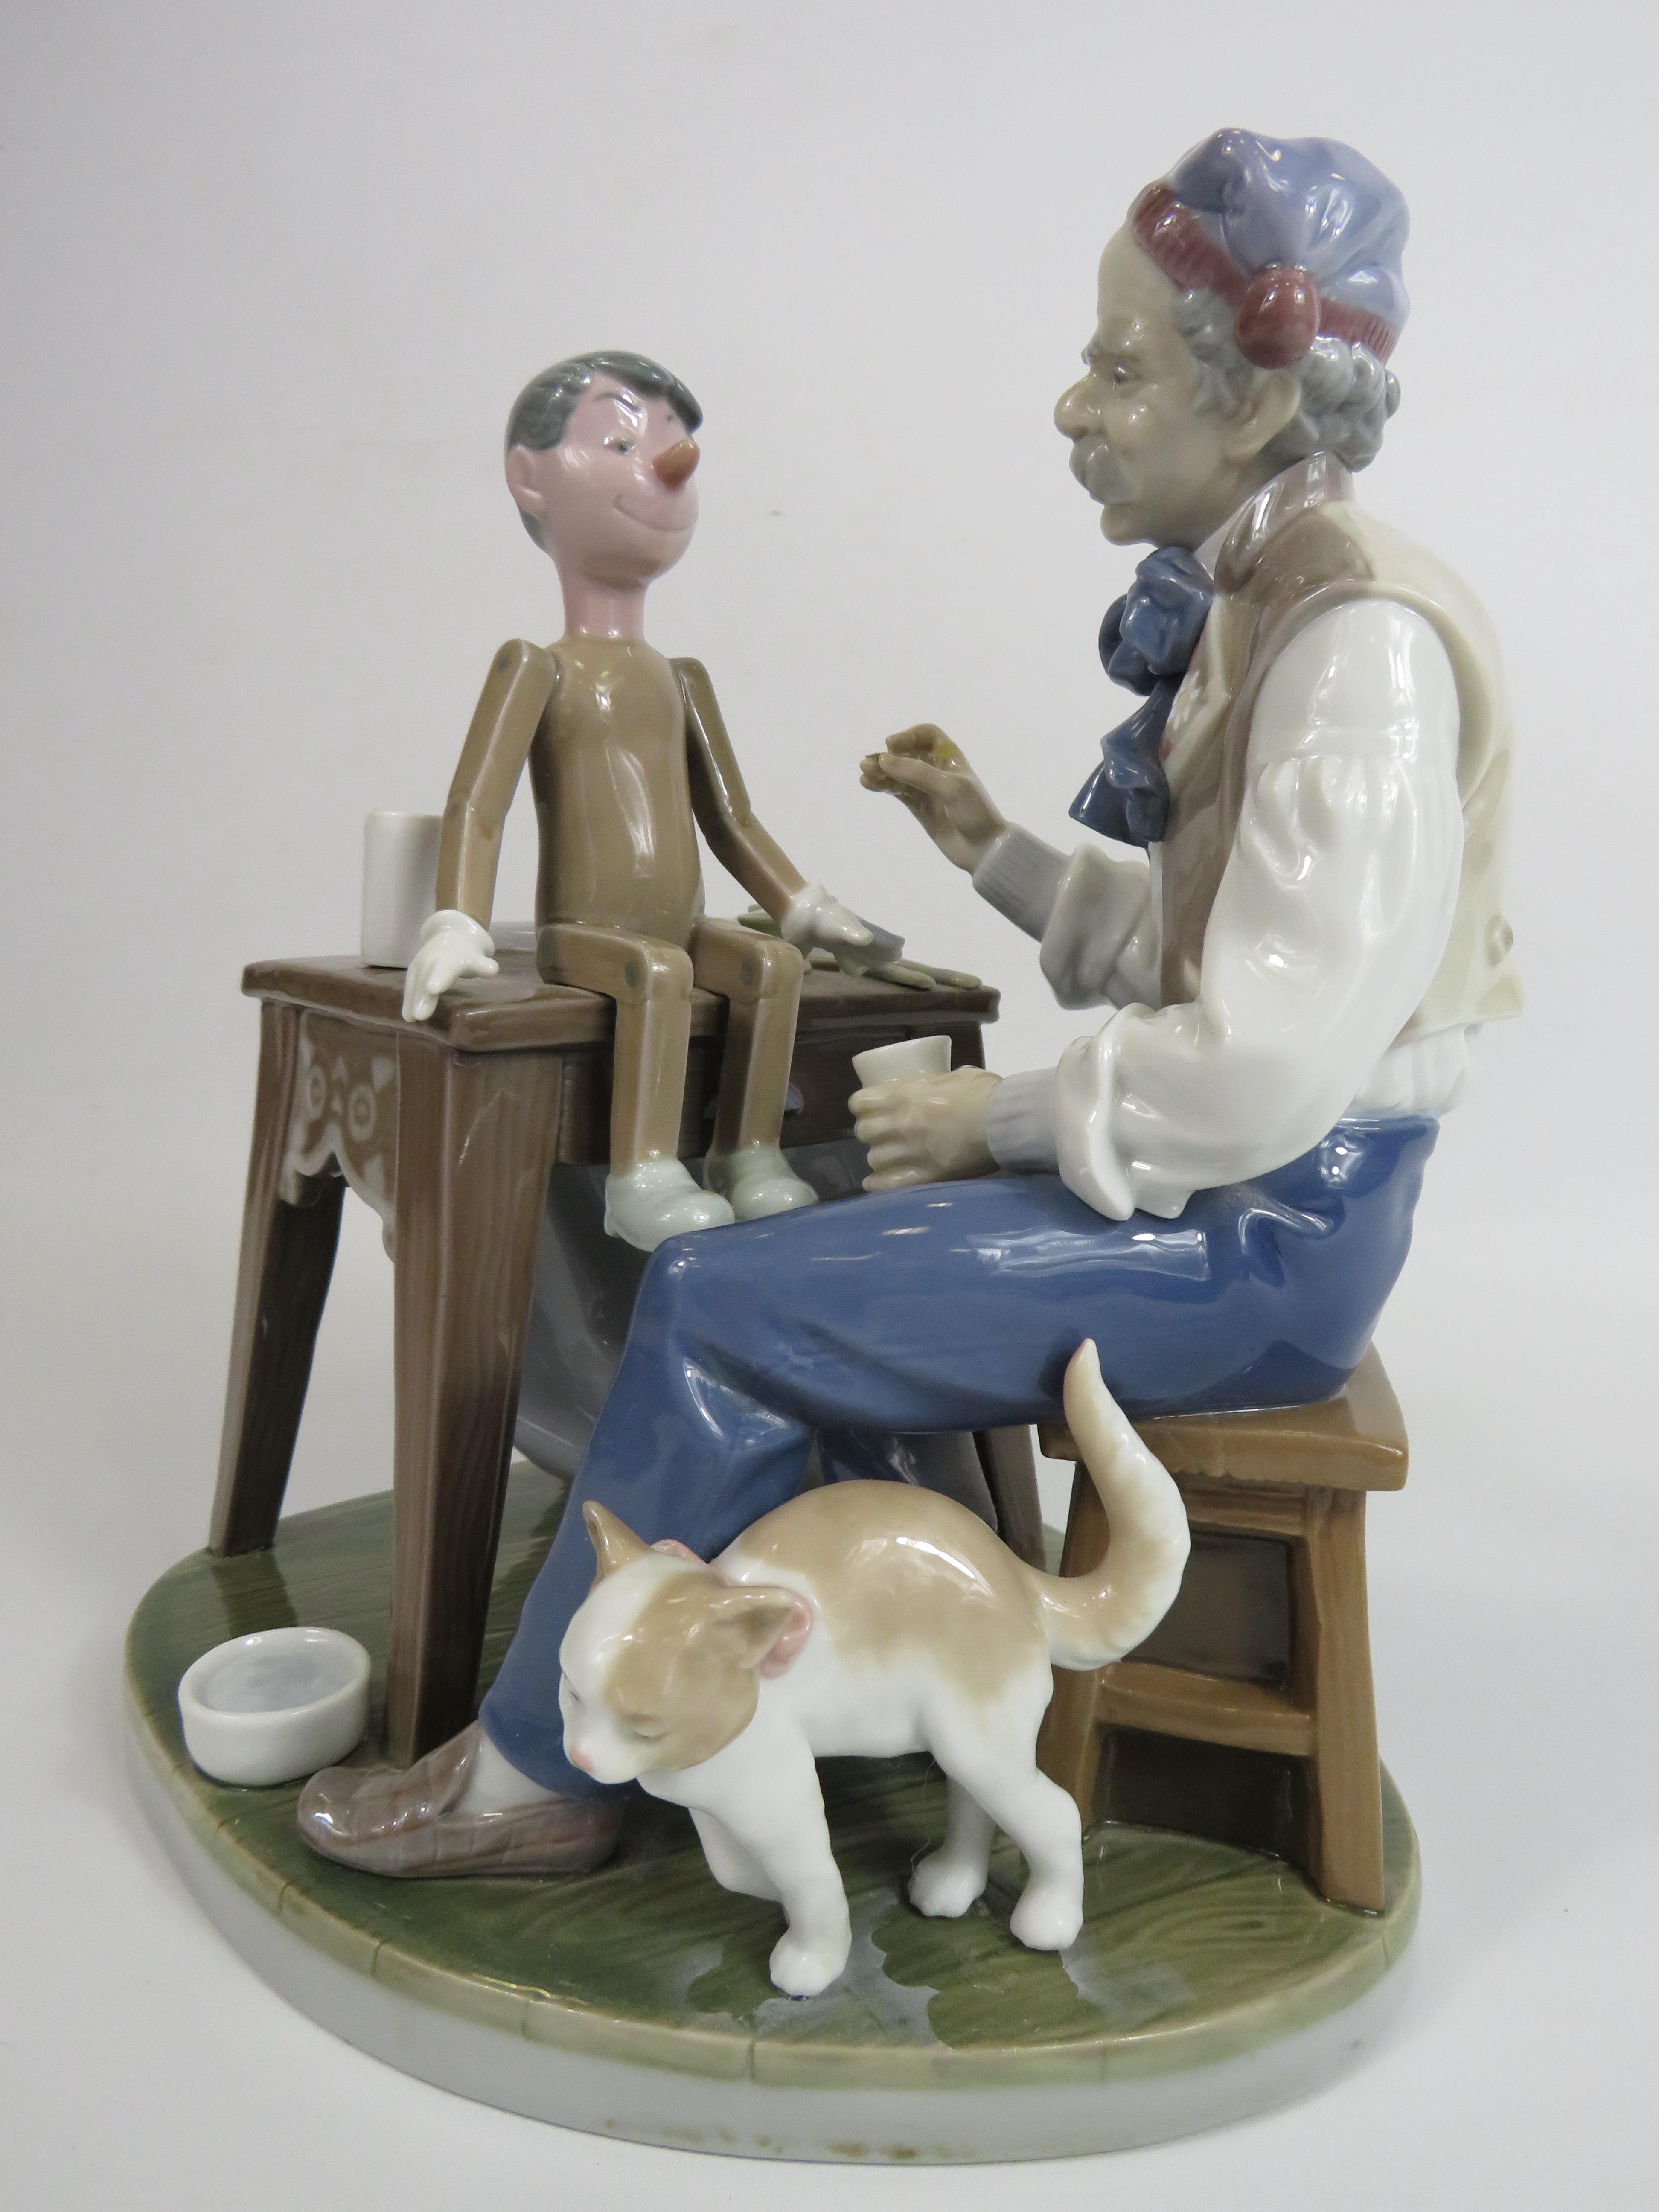 Lladro figurine The puppet painter Geppetto & Pinocchio Model no 5396, (Missing paint brush and